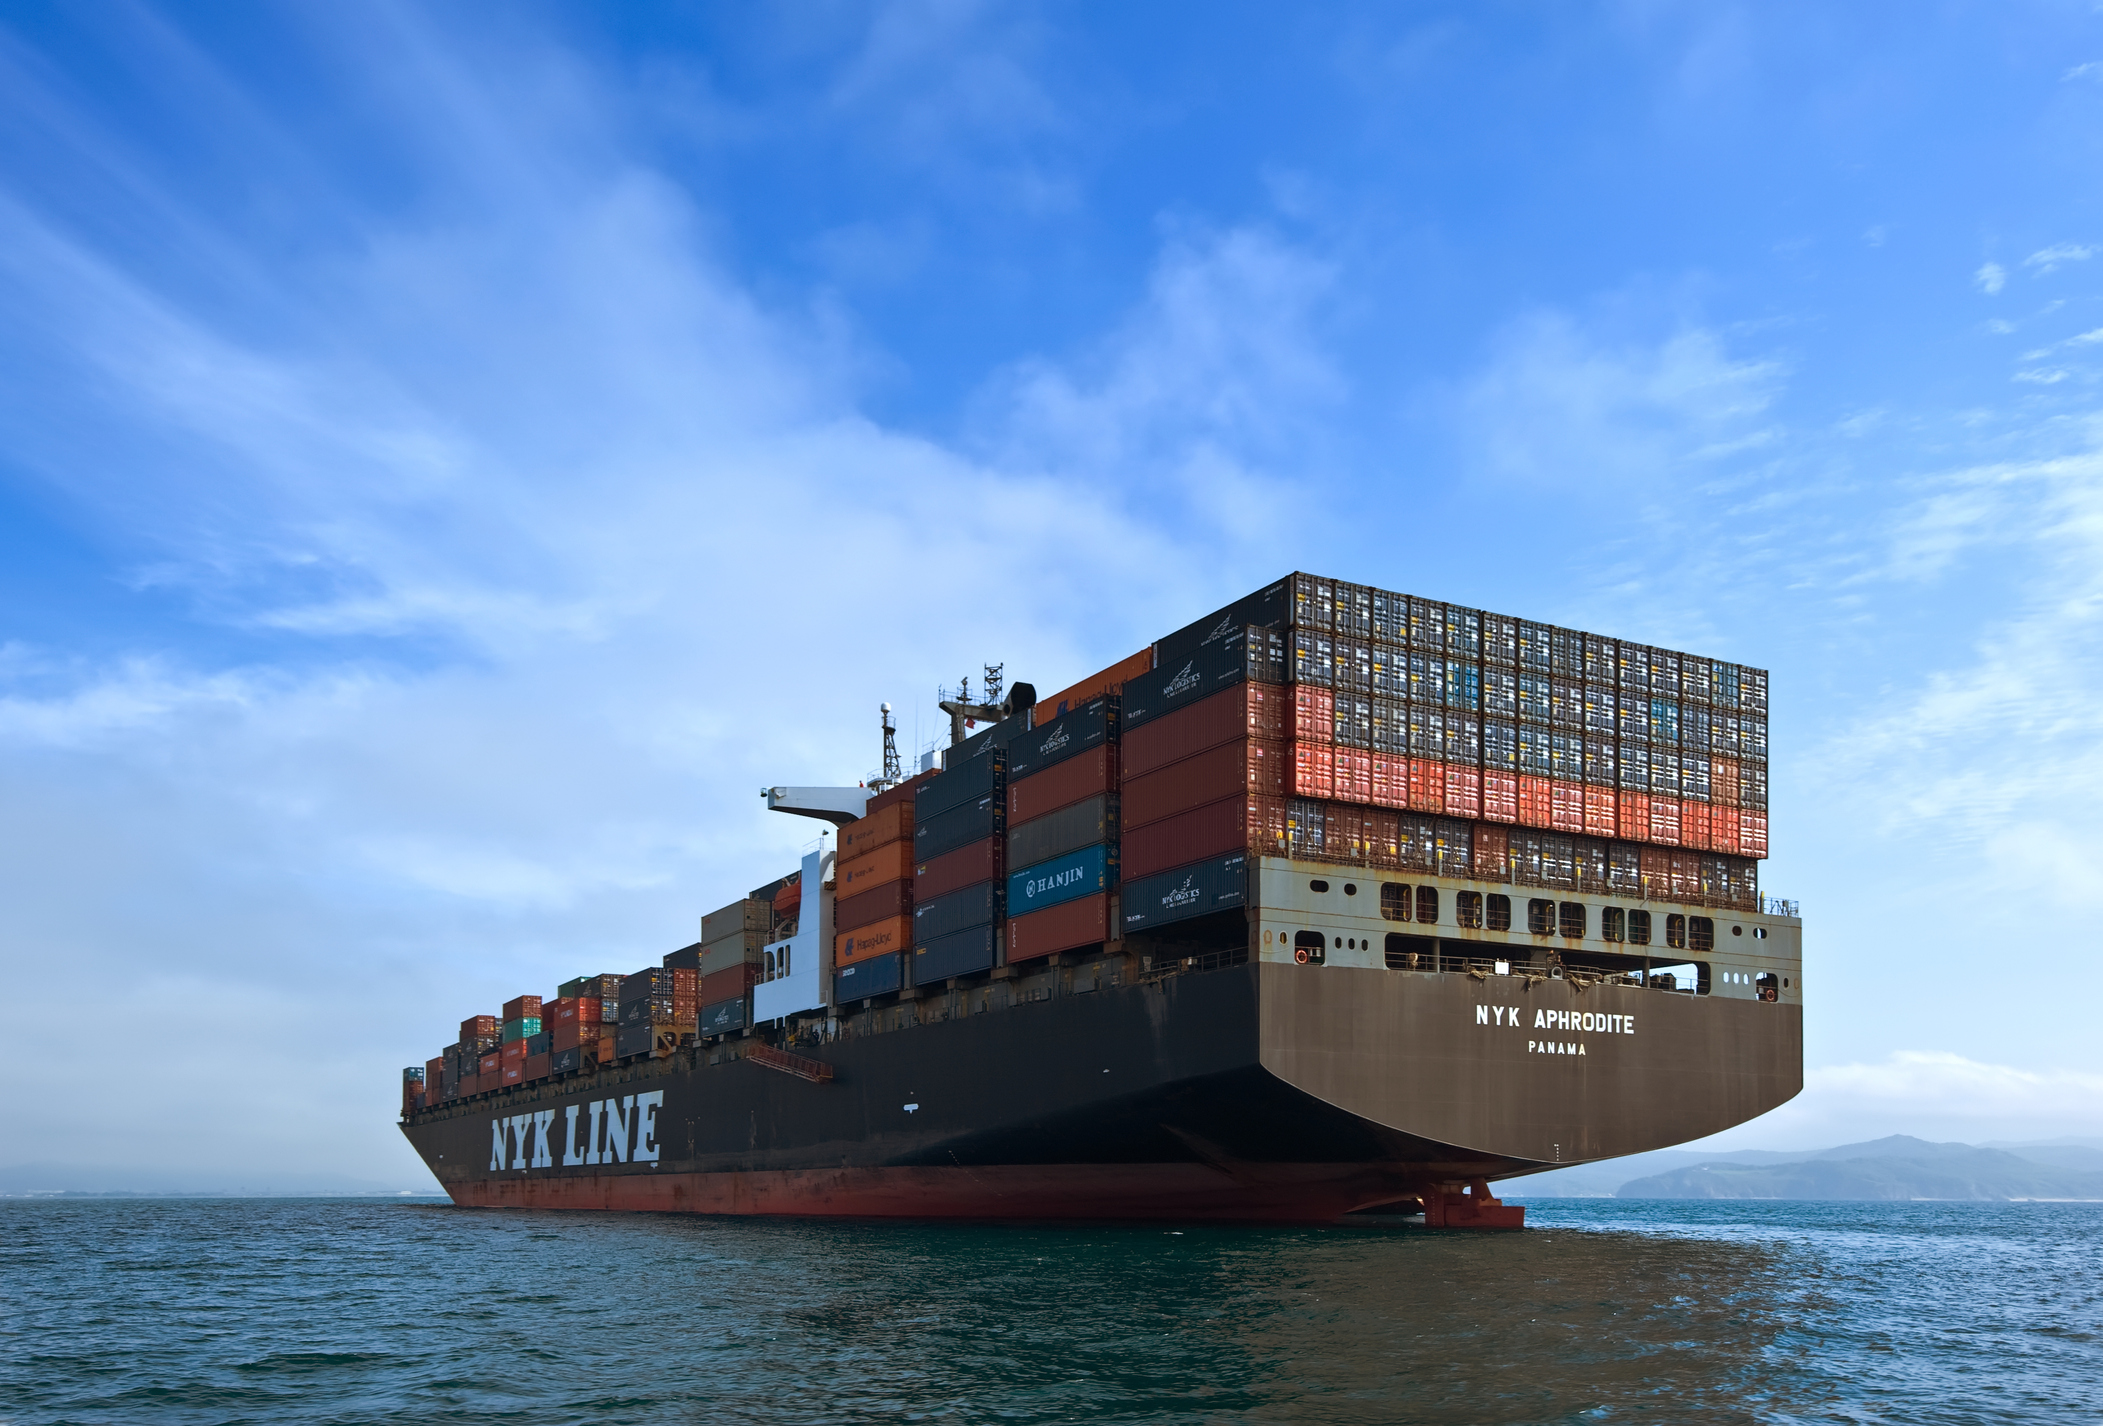 NYK uses energy-saving devices to reduce GHG emissions from existing ships